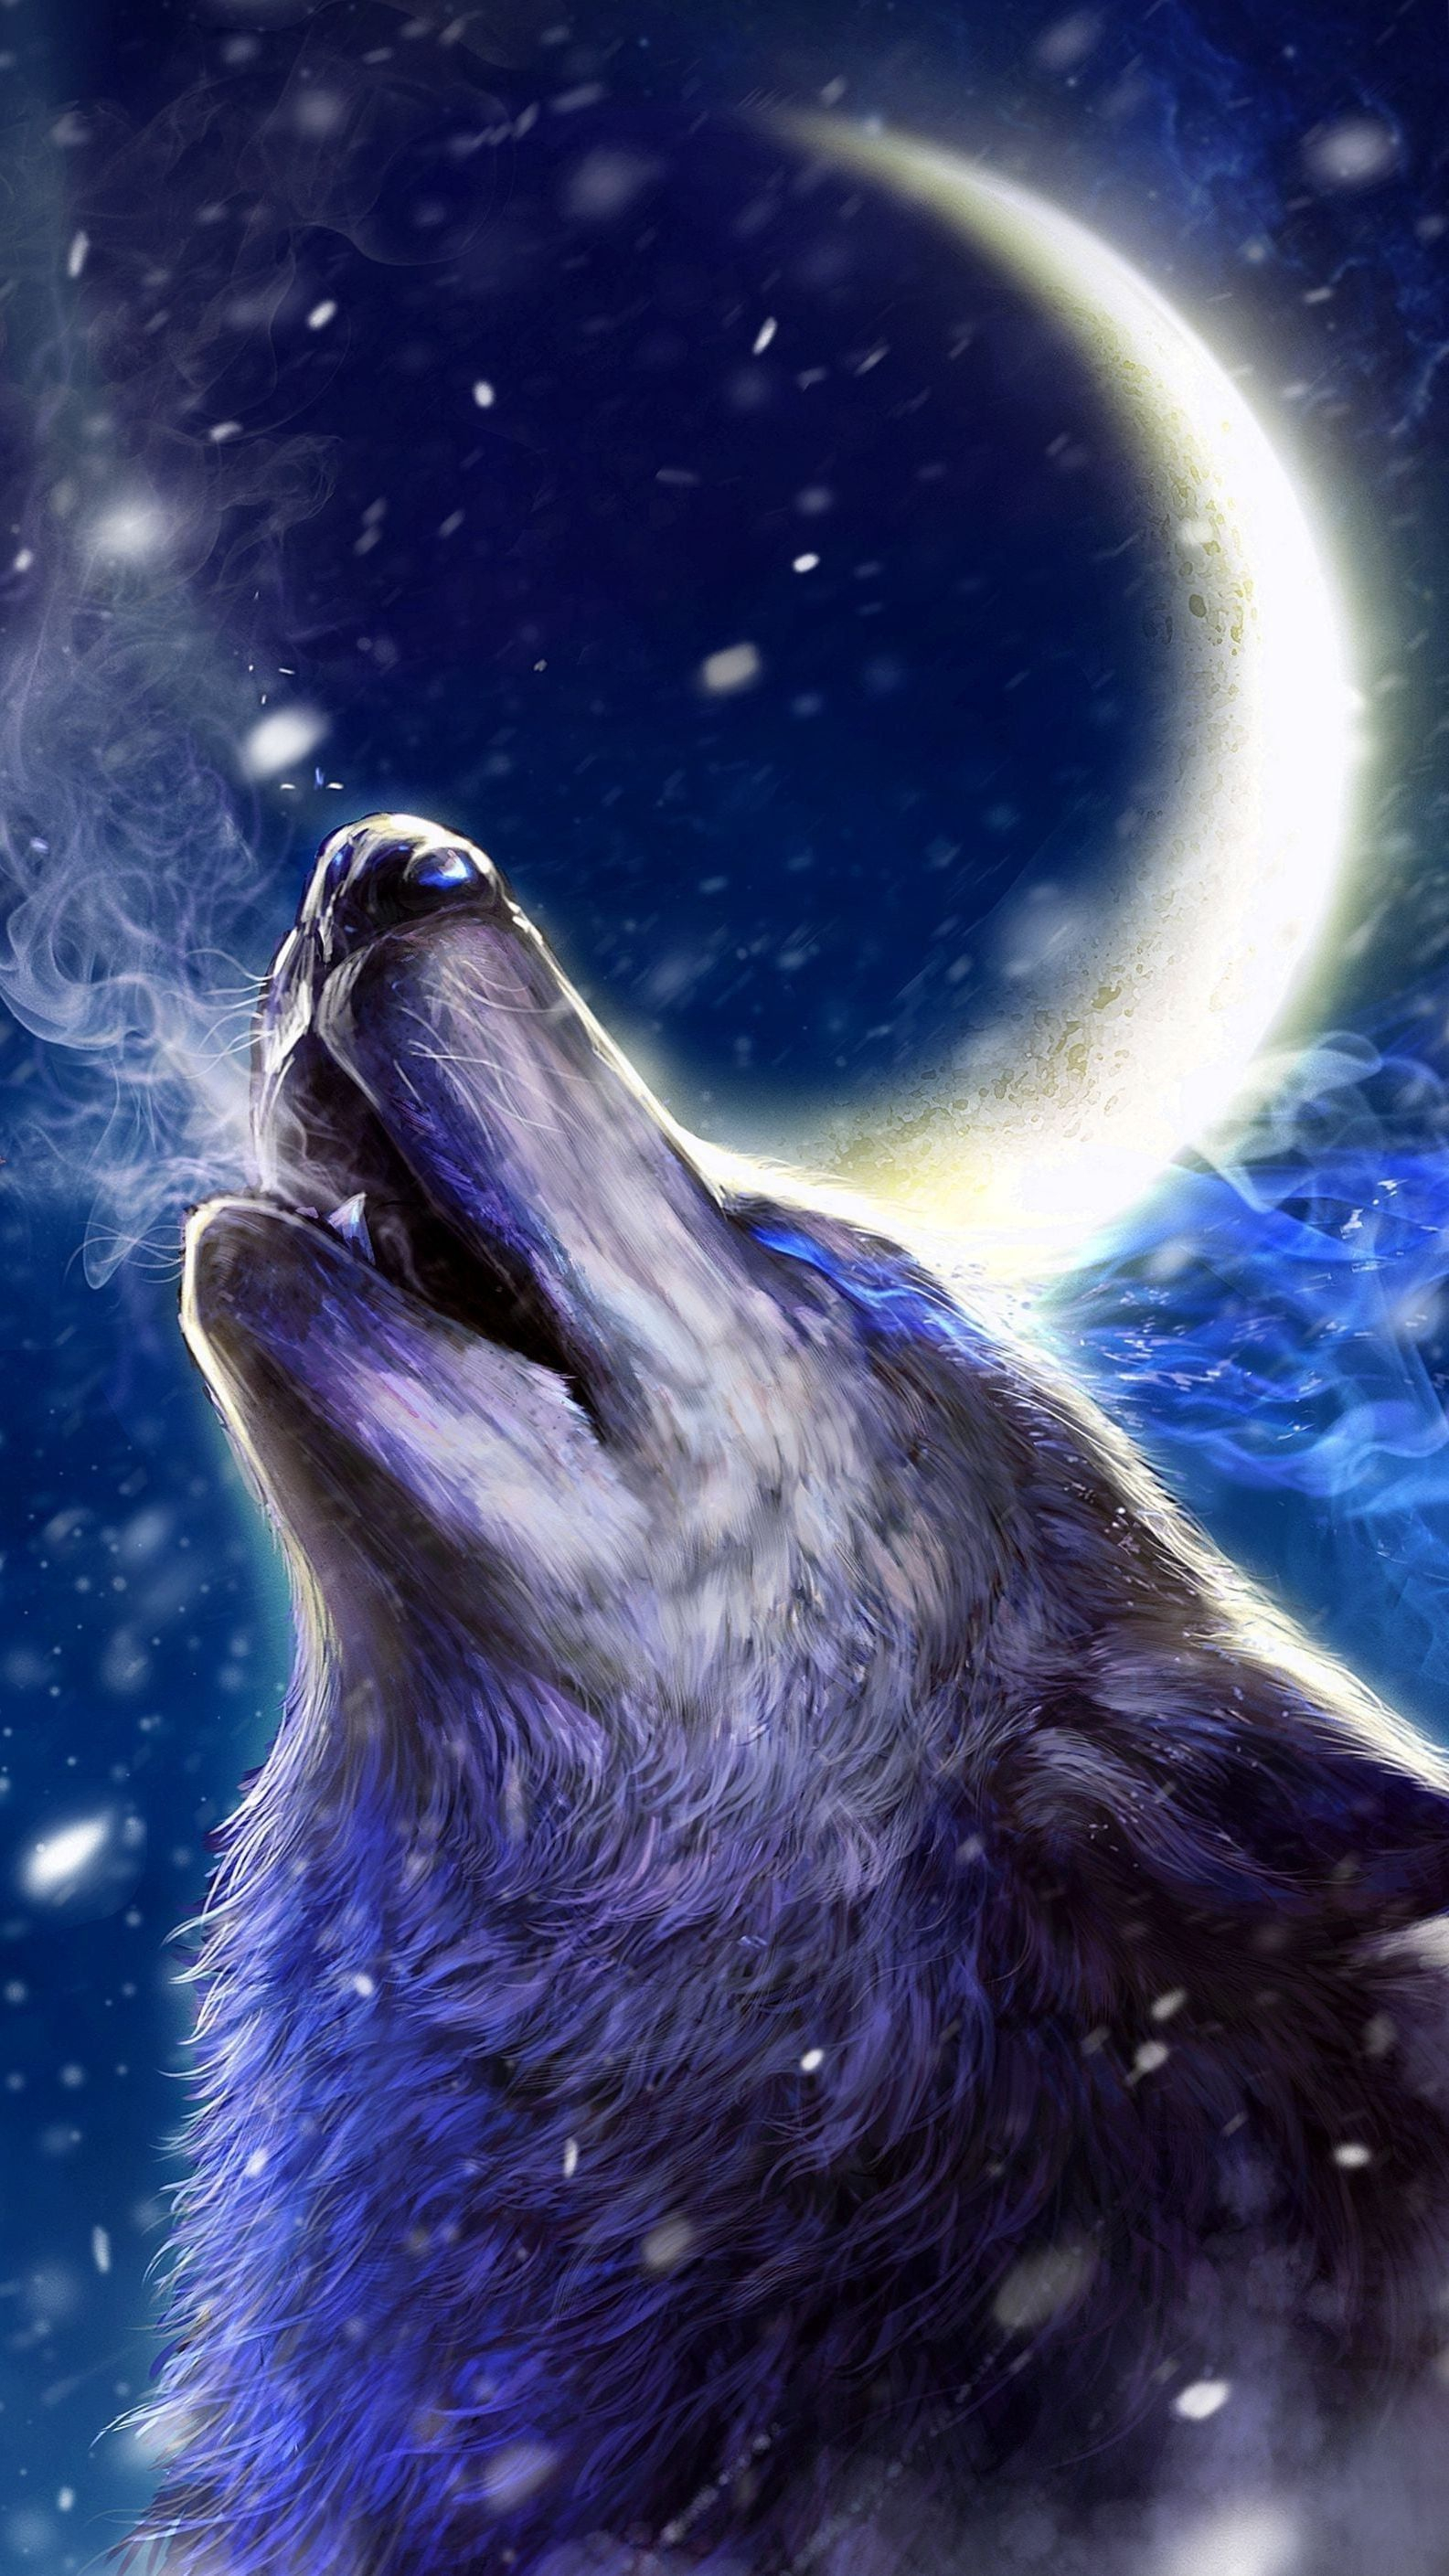 1585x2818 Android Live Wallpapers Wolves Howling #Android #Live #Wallpapers #Wolves # Howling | Wolf background, Wolf wallpaper, Wolf pictures